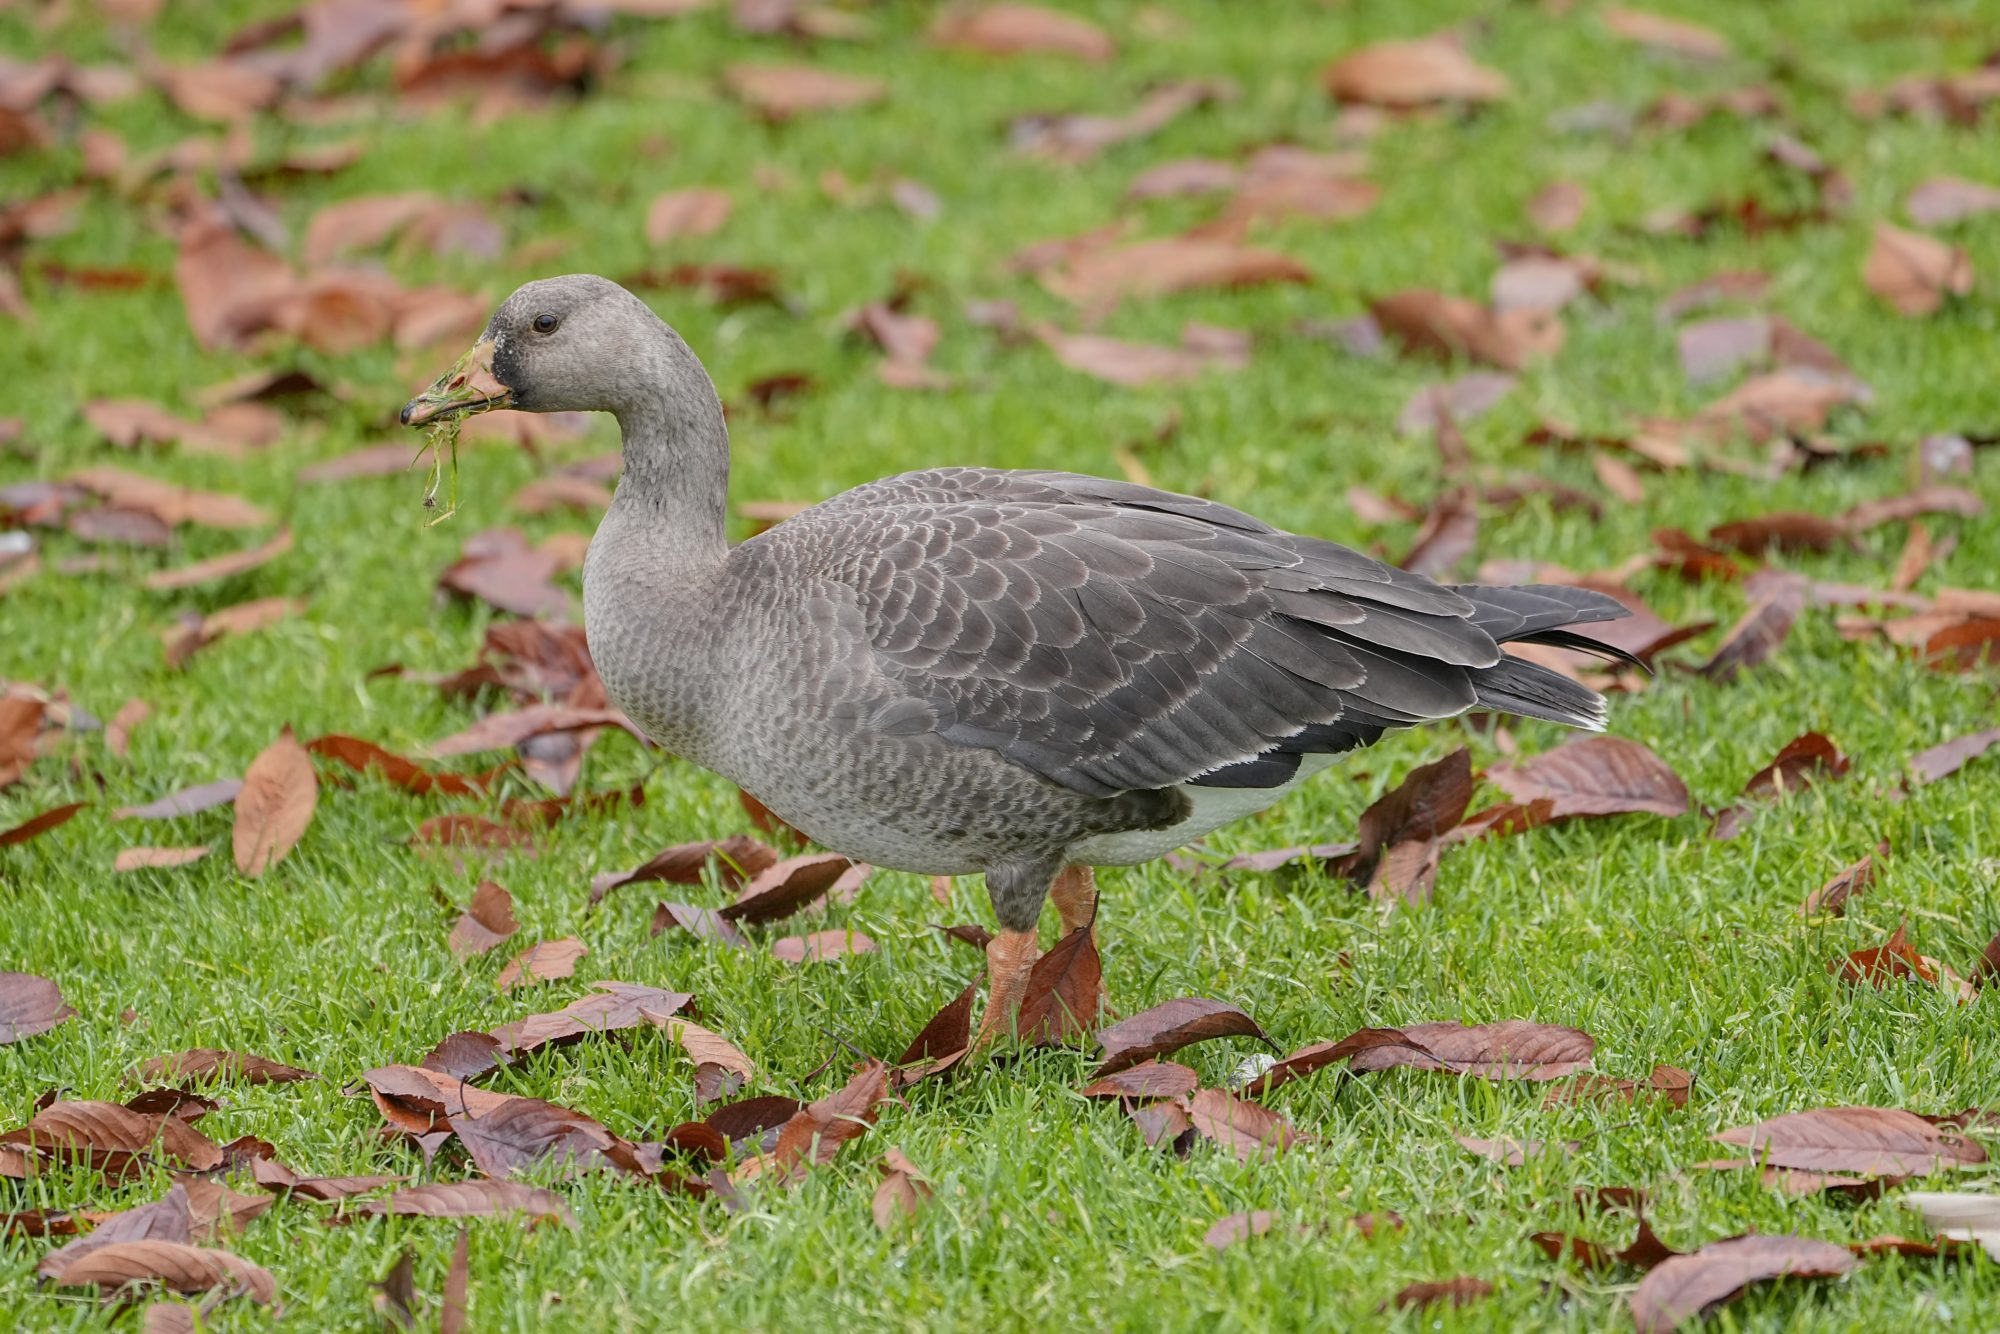 An immature White-fronted Goose on the grass, surrounded by some dead leaves. It has some messy bits of grass on its bill